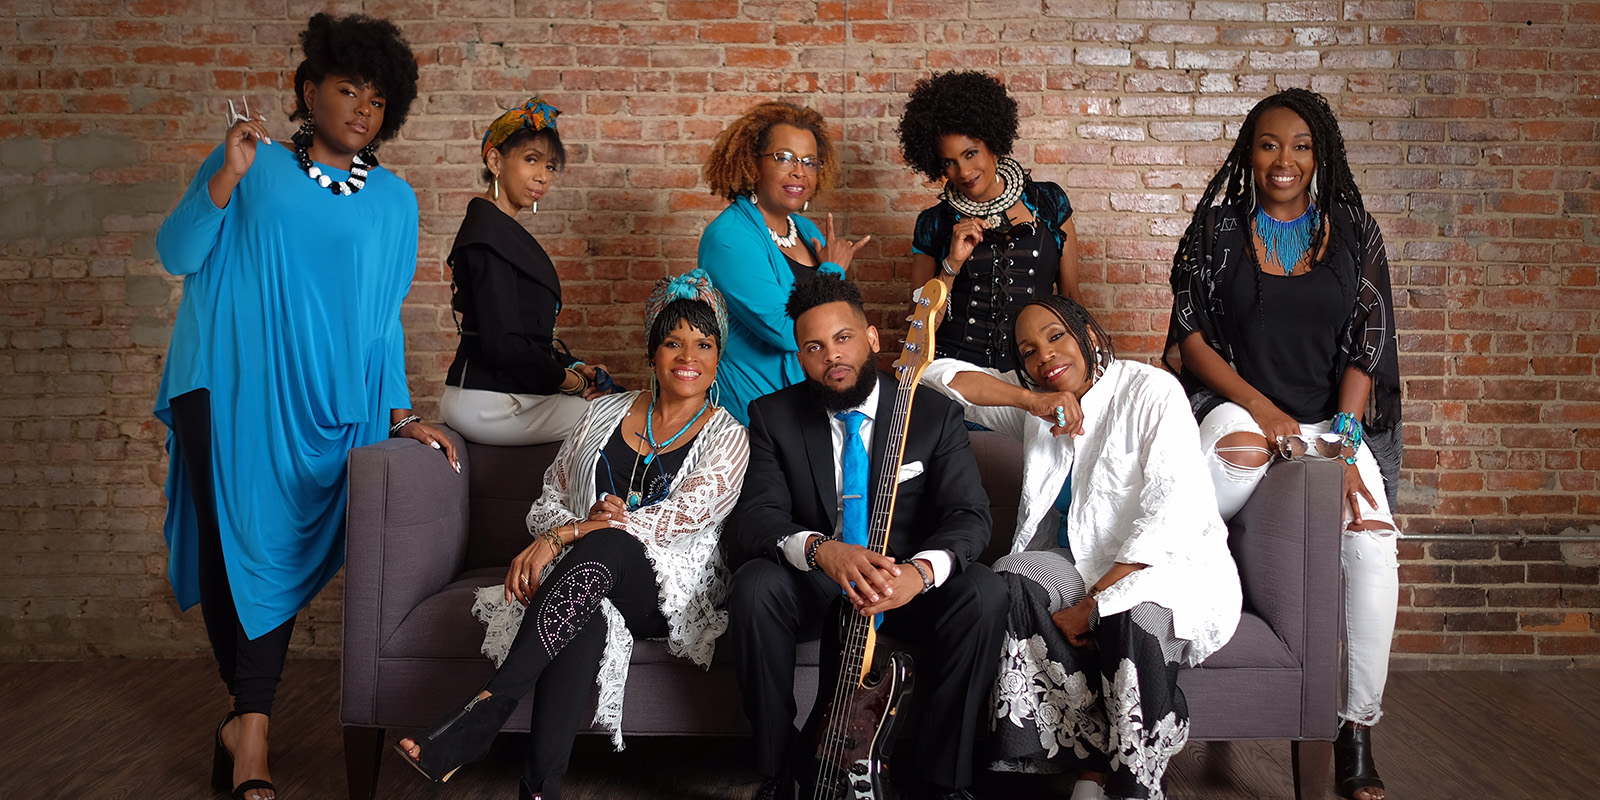 Seven women and one man in black and blue clothing sit on and around a gray couch in front of a red brick wall.